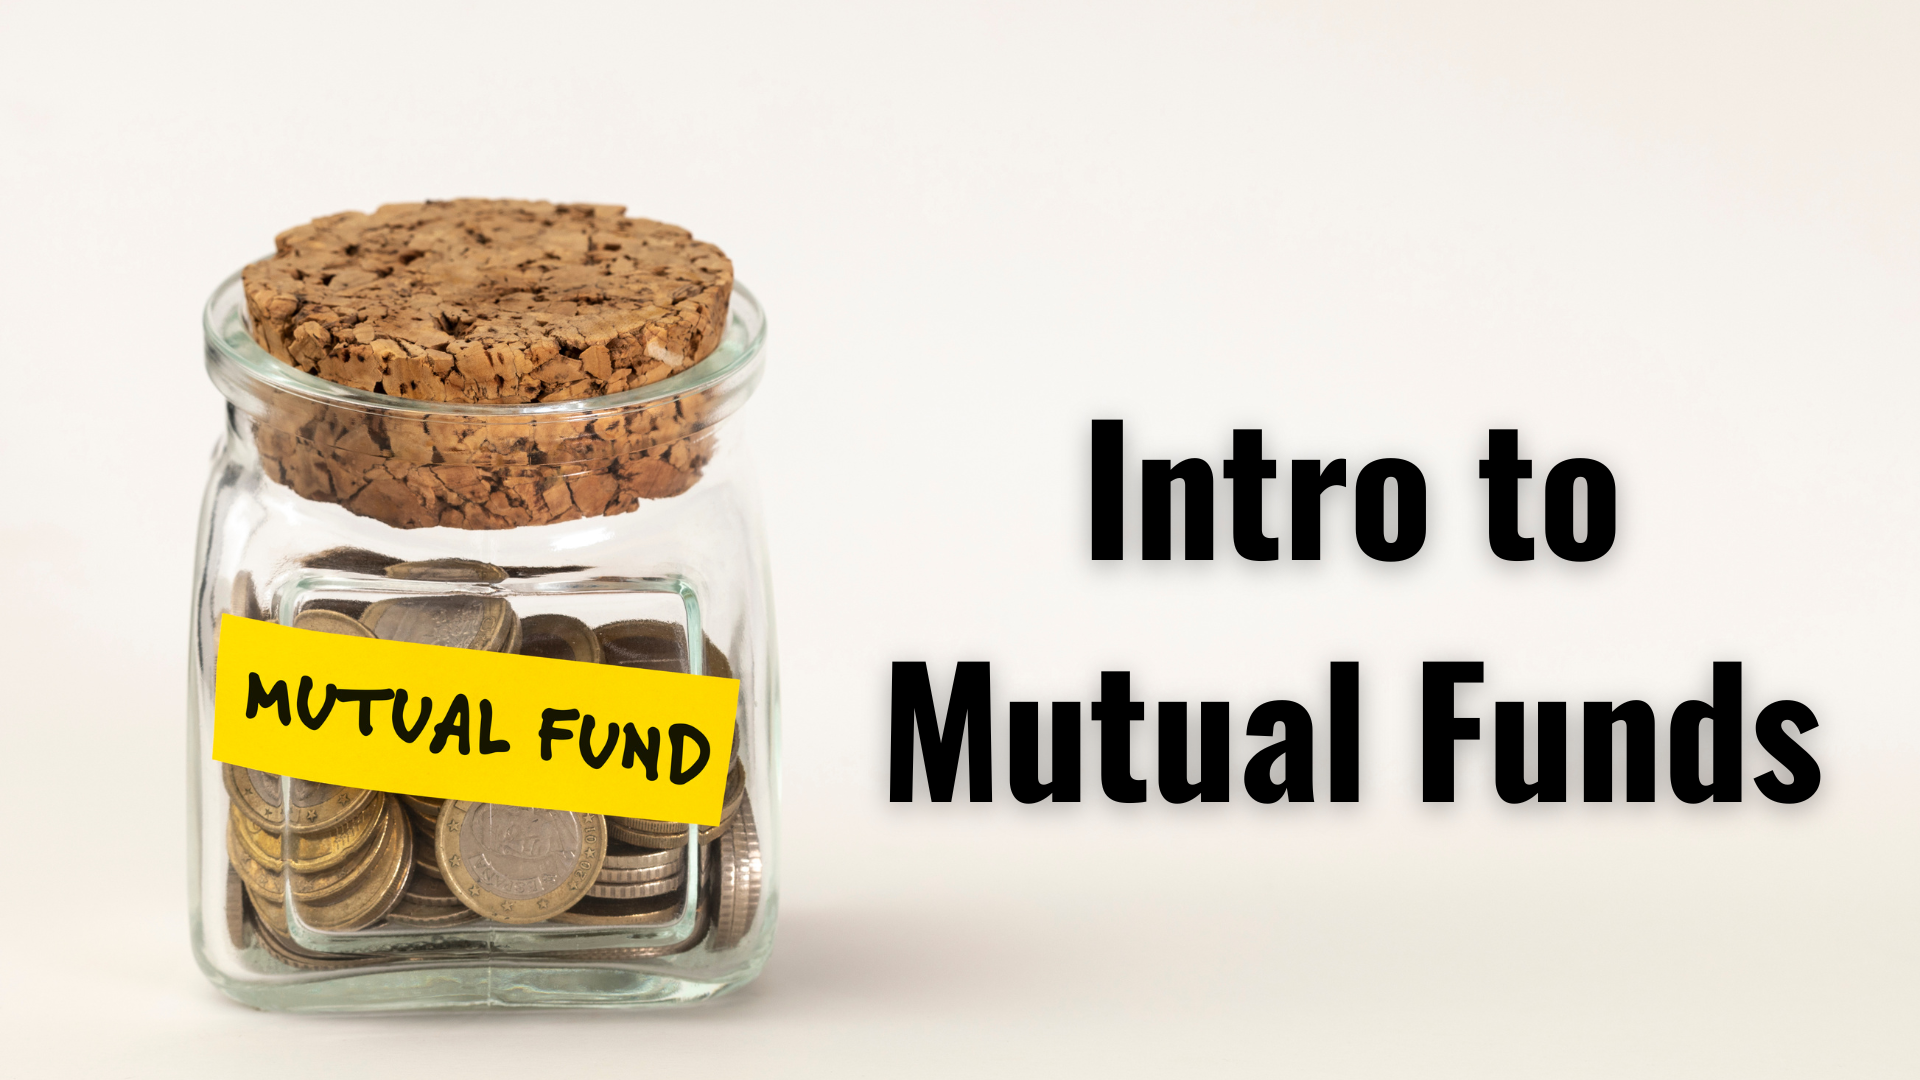 Intro to Mutual Funds - Wall Street Survivor